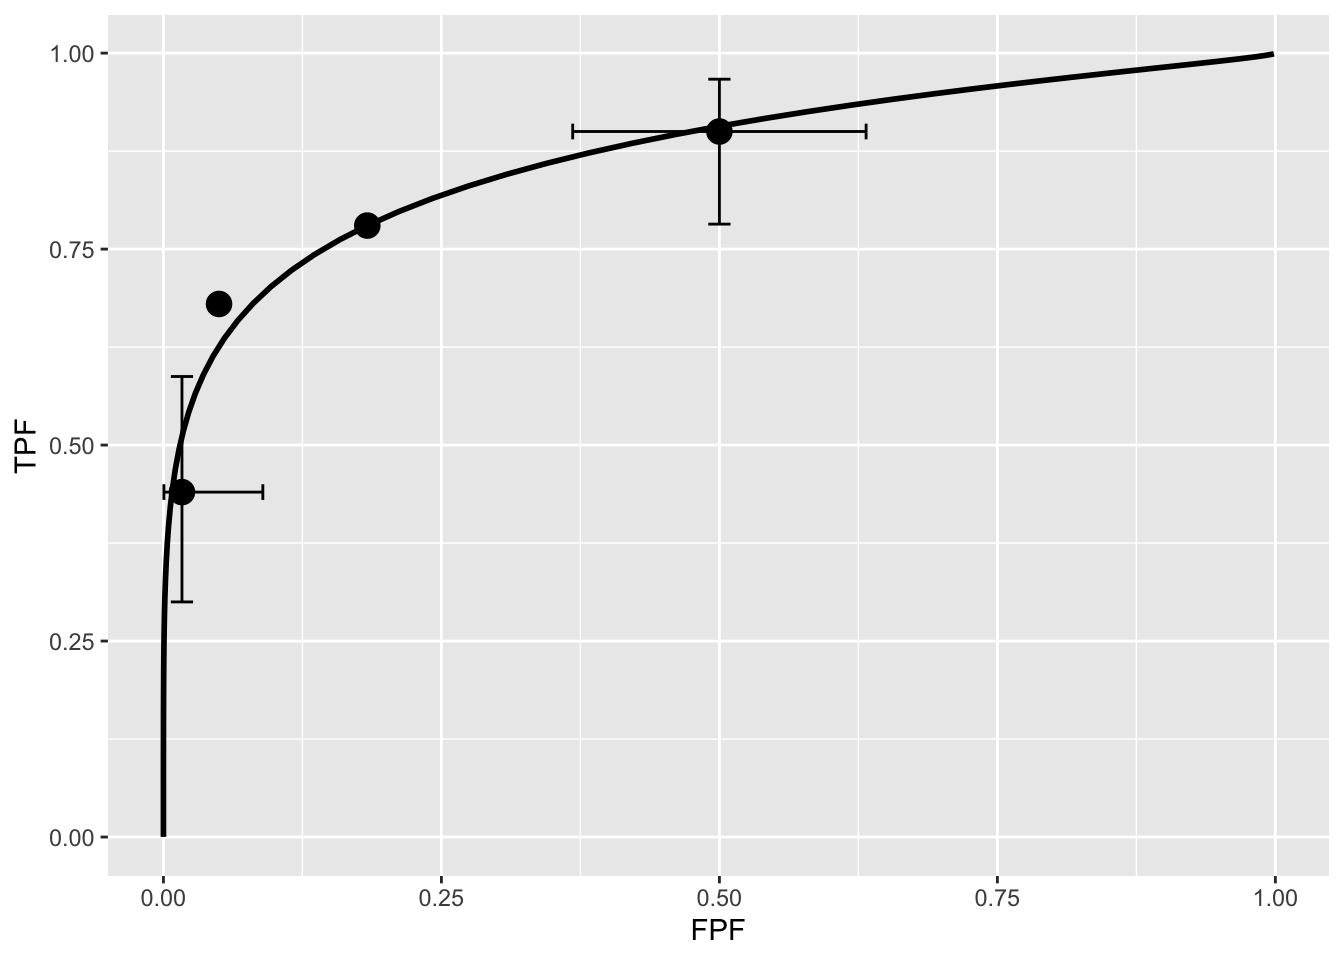 Operating points and fitted binormal ROC curve. The fitting values are $a = 1.3205$ and $b = 0.6075$. Confidence intervals are shown for the lowest and uppermost non-trivial points.